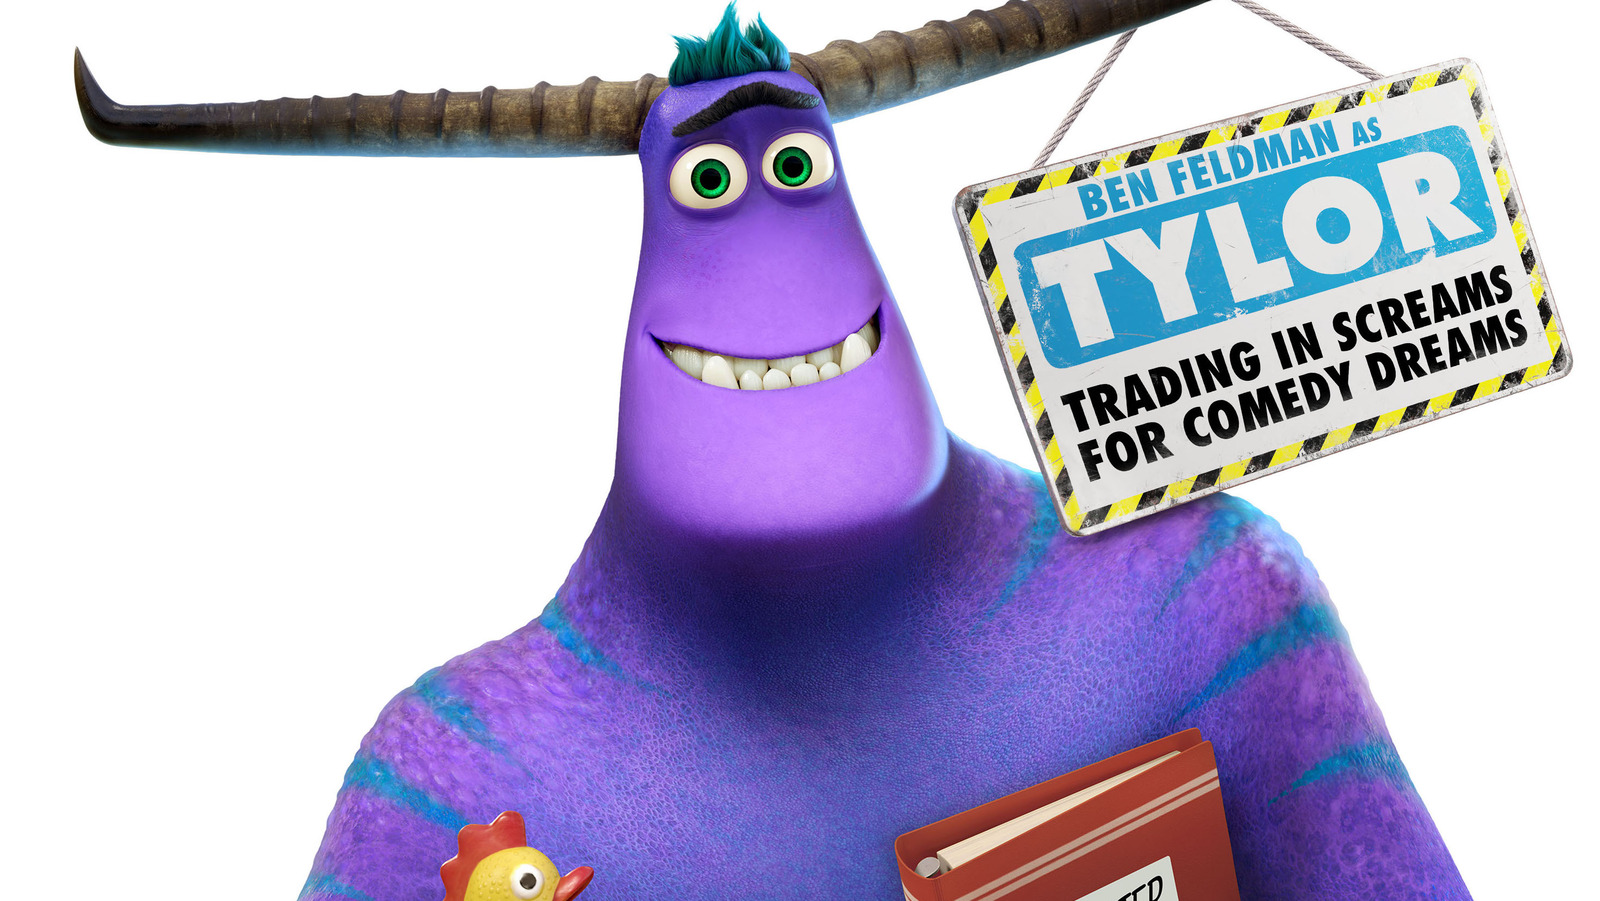 Monsters Inc Show Images Reveal The New Character At Work